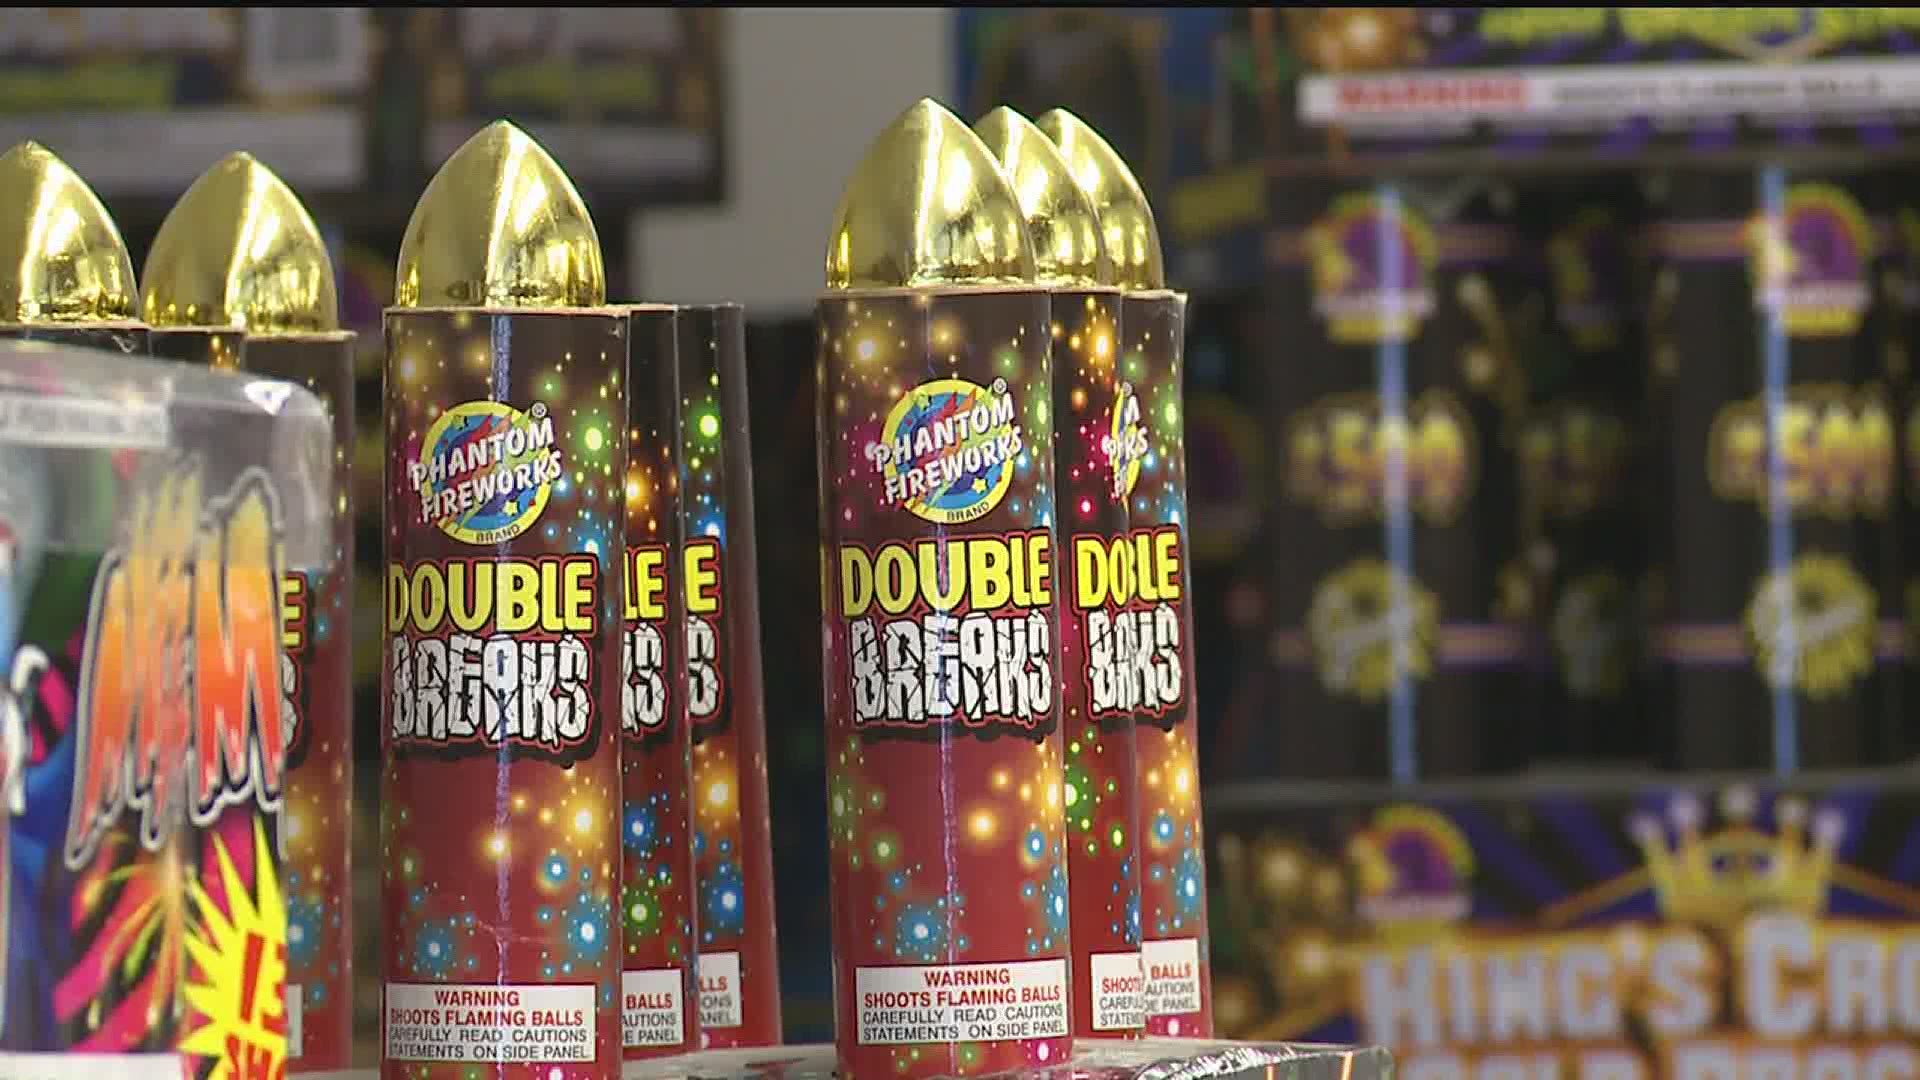 York City officials remind residents of restrictions in place with fireworks, following numerous complaints about safety and noise.